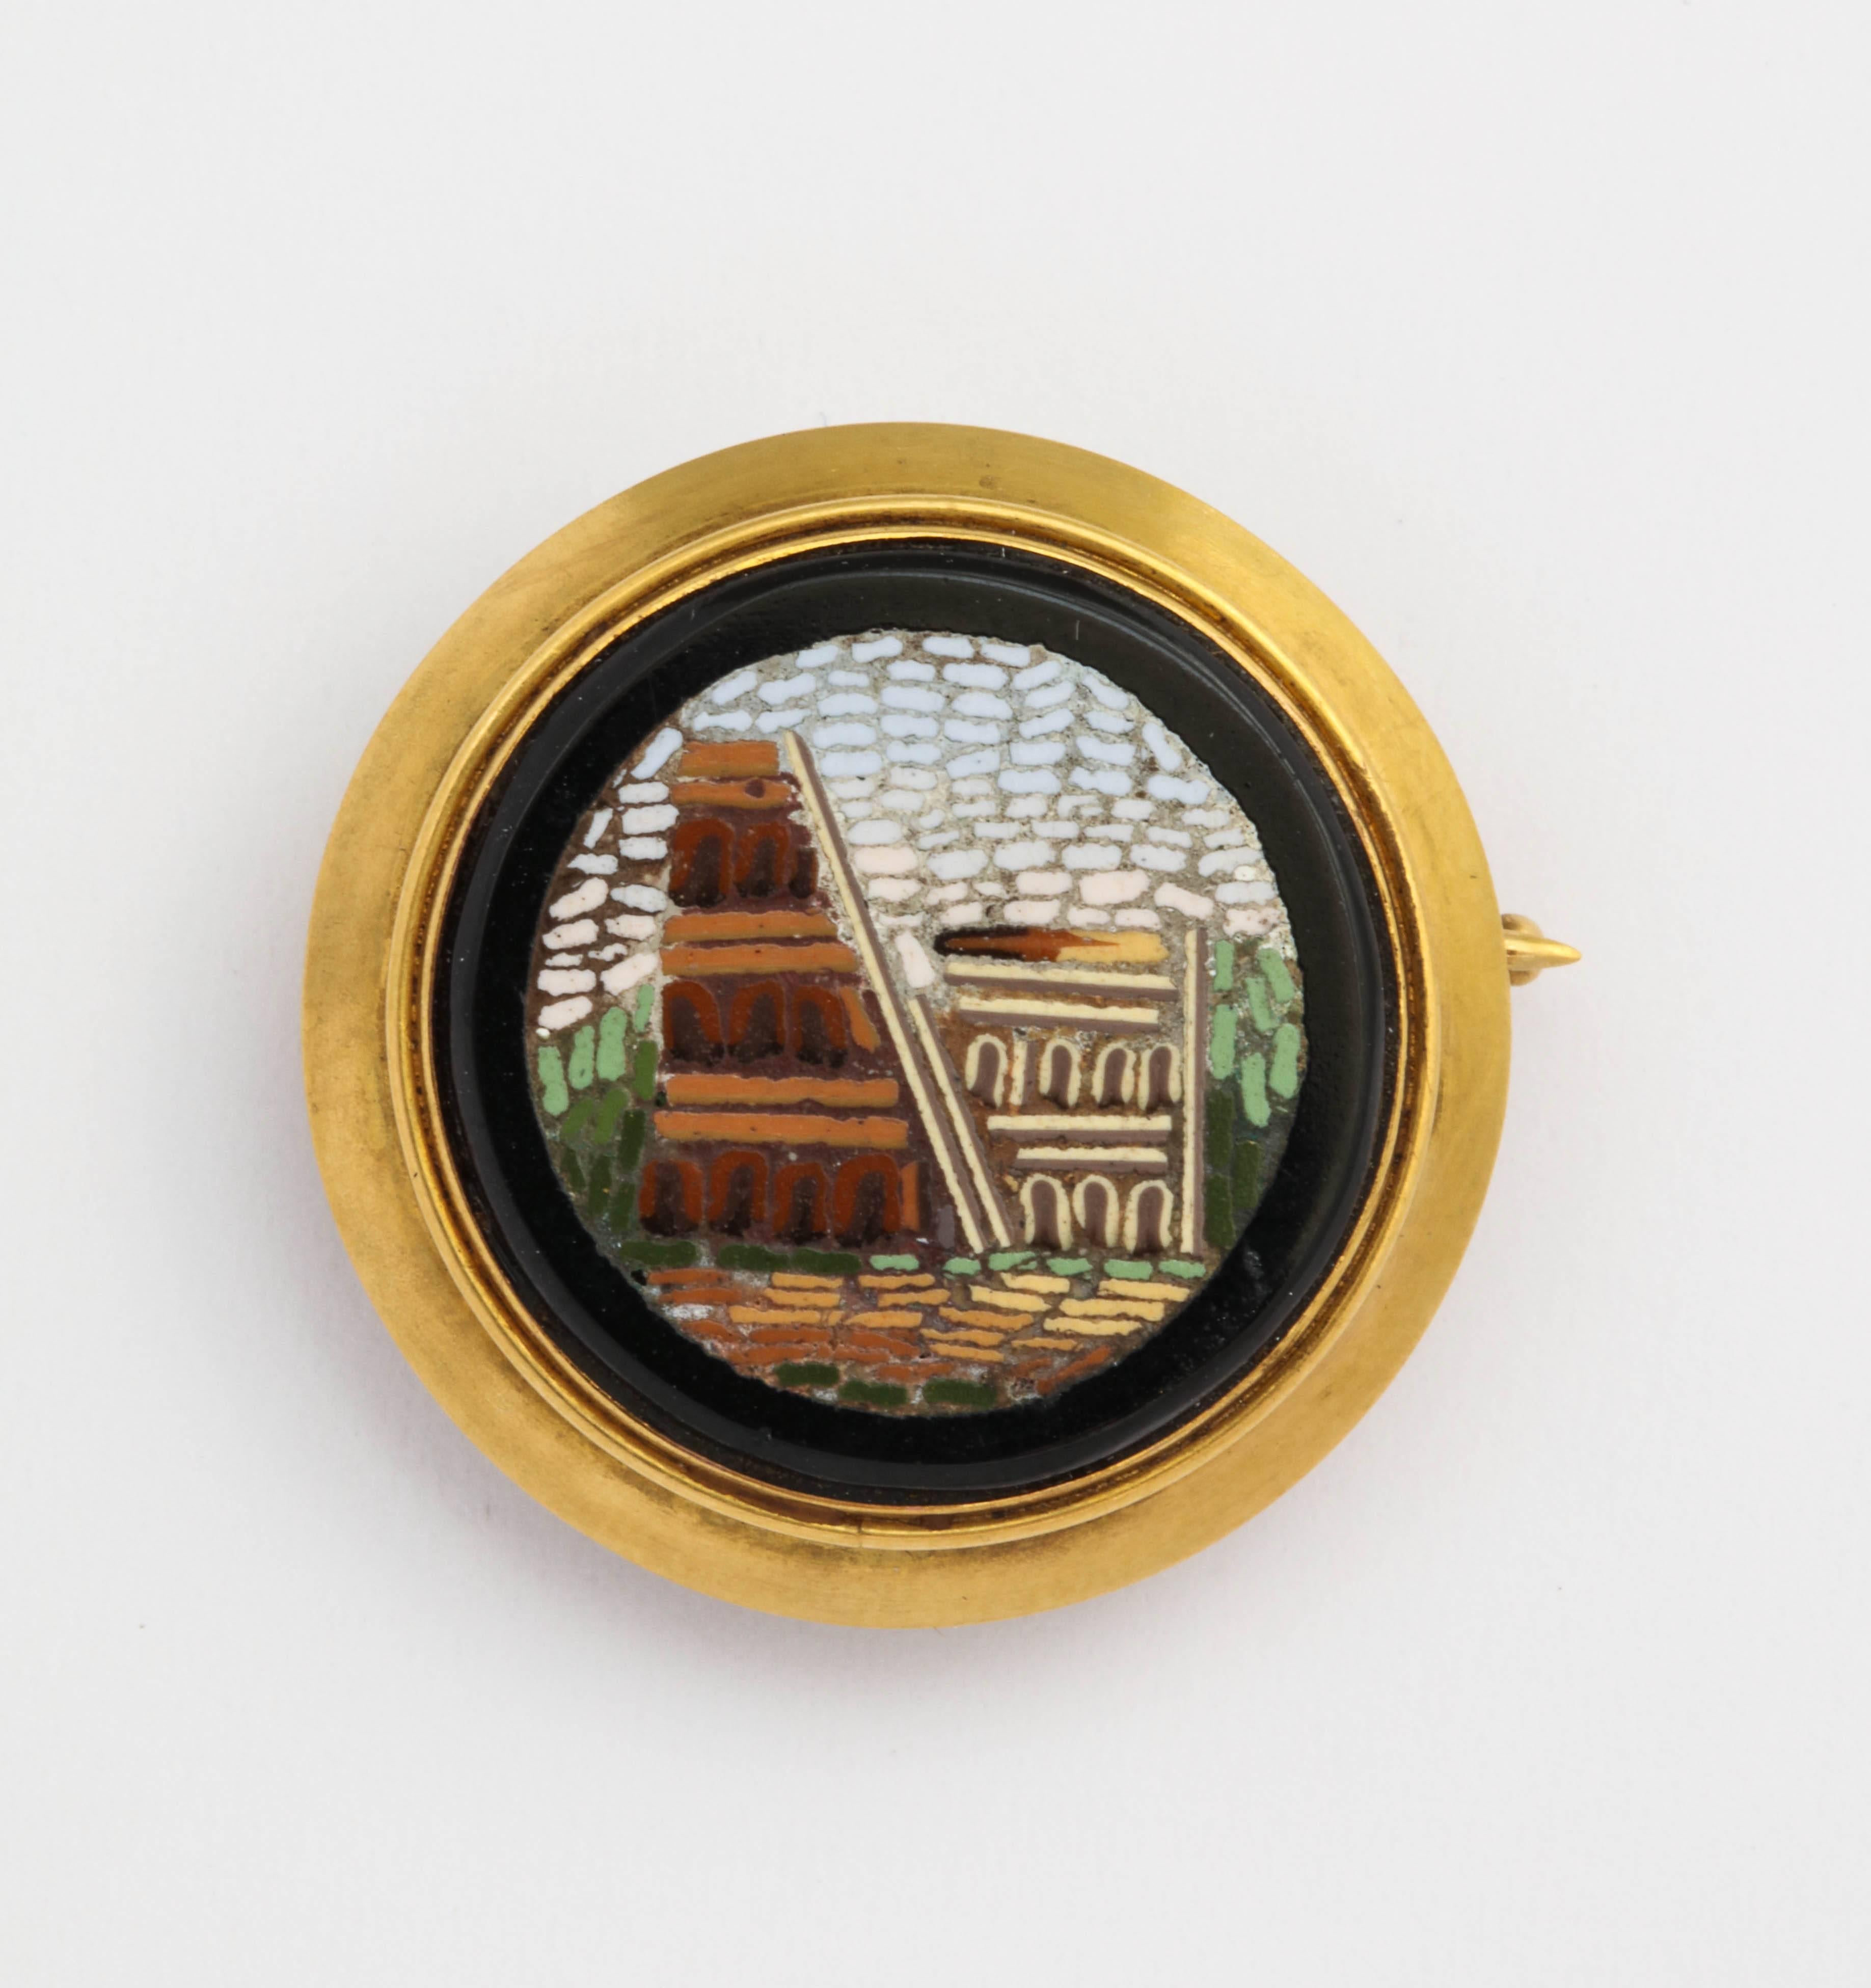 Russian pin/pendant from the Romanov era, period of Tsar Alexander III, depicting a Roman ruin, this 19th century Italian micro-mosaic memento of a Grand Tour, was mounted as a gold brooch by Nicholls & Plincke of St. Petersburg. Within a smooth